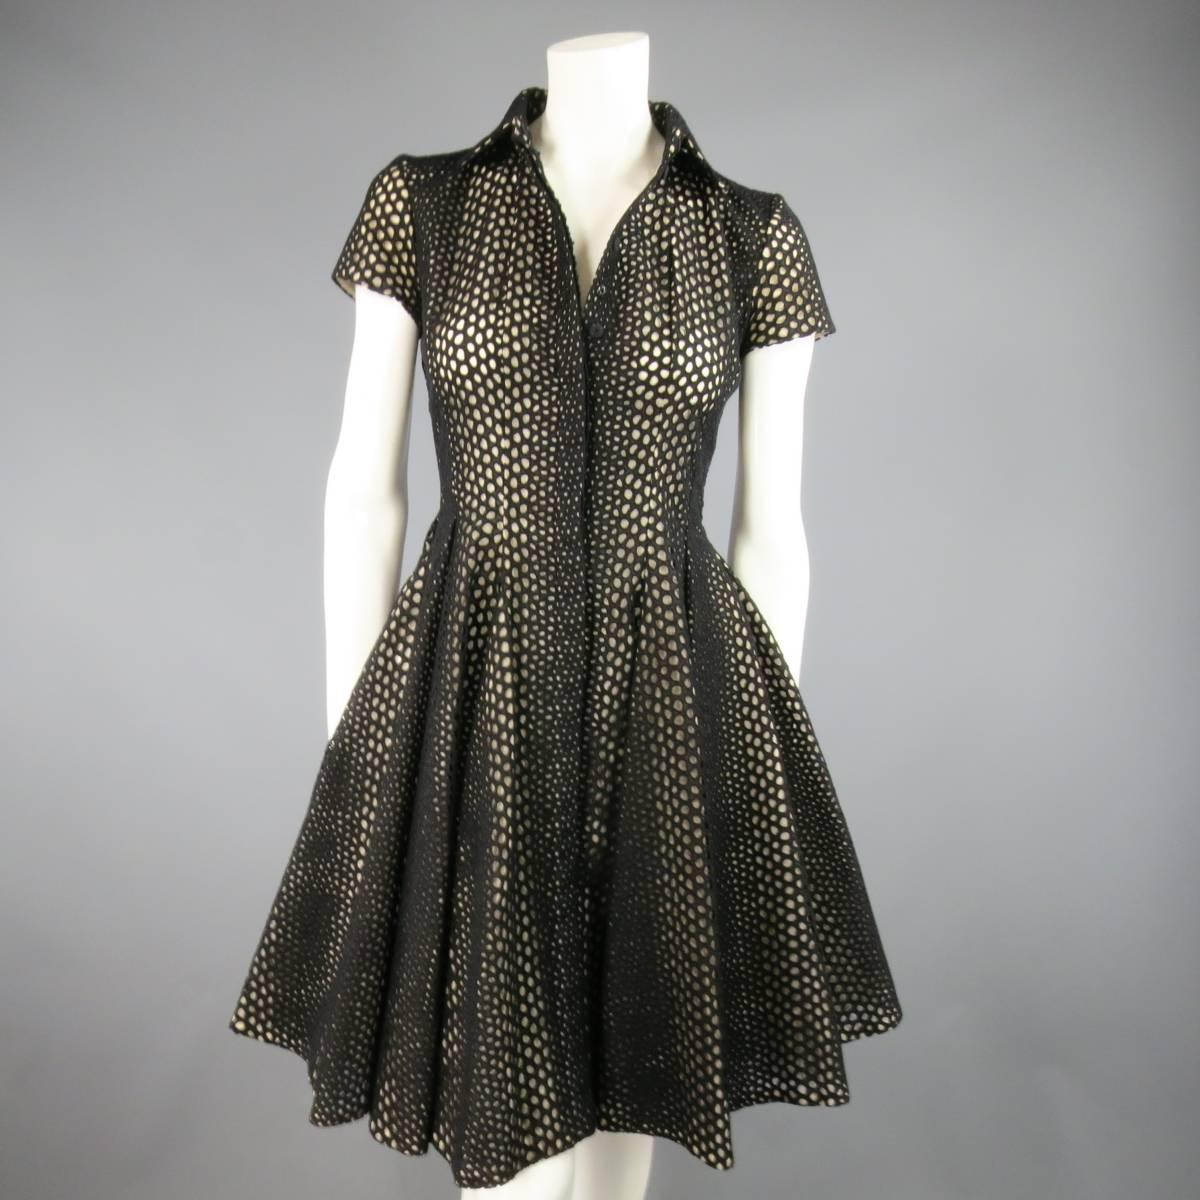 This gorgeous Giambattista Valli shirt dress comes in a black eyelet lace with peachy beige underlay and features a pointed collar, short cap sleeves, hidden placket snap closure, and pleated ruffle flare skirt. Made in Italy.
Retails at $2795.00.
